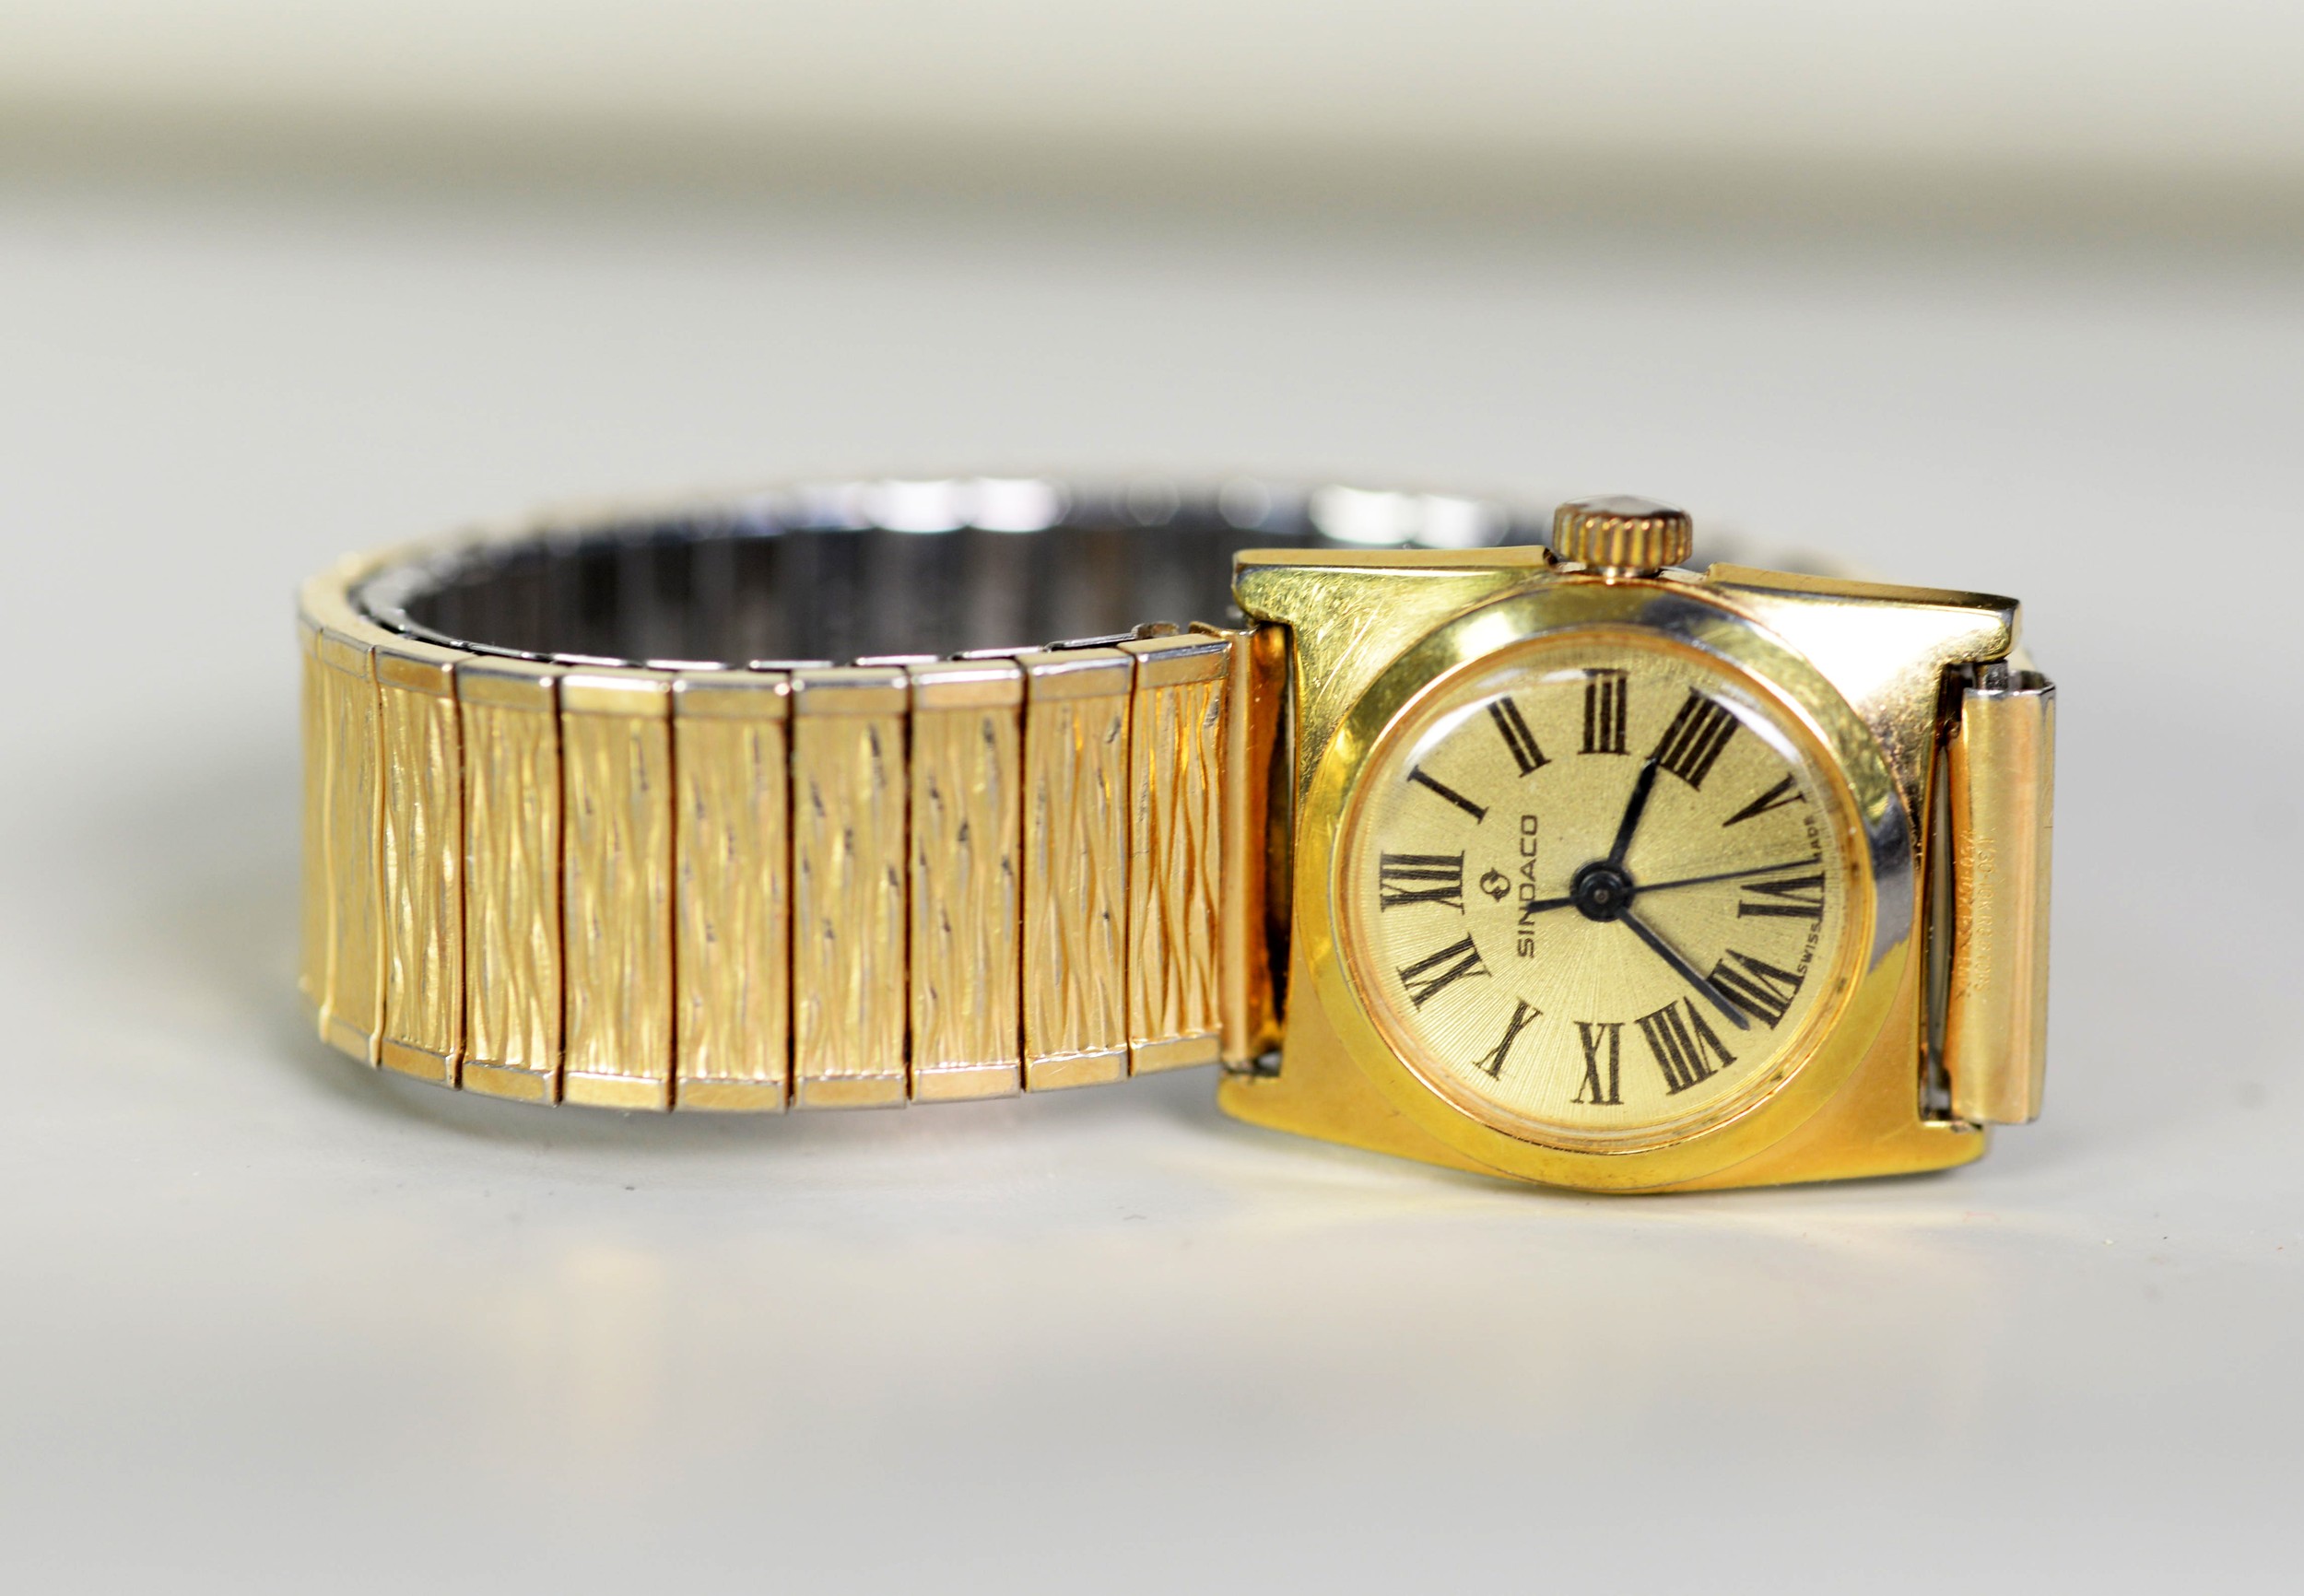 LADY'S SINDACO SWISS GOLD PLATED BRACELET WATCH with mechnaical movement, roman dial with centre